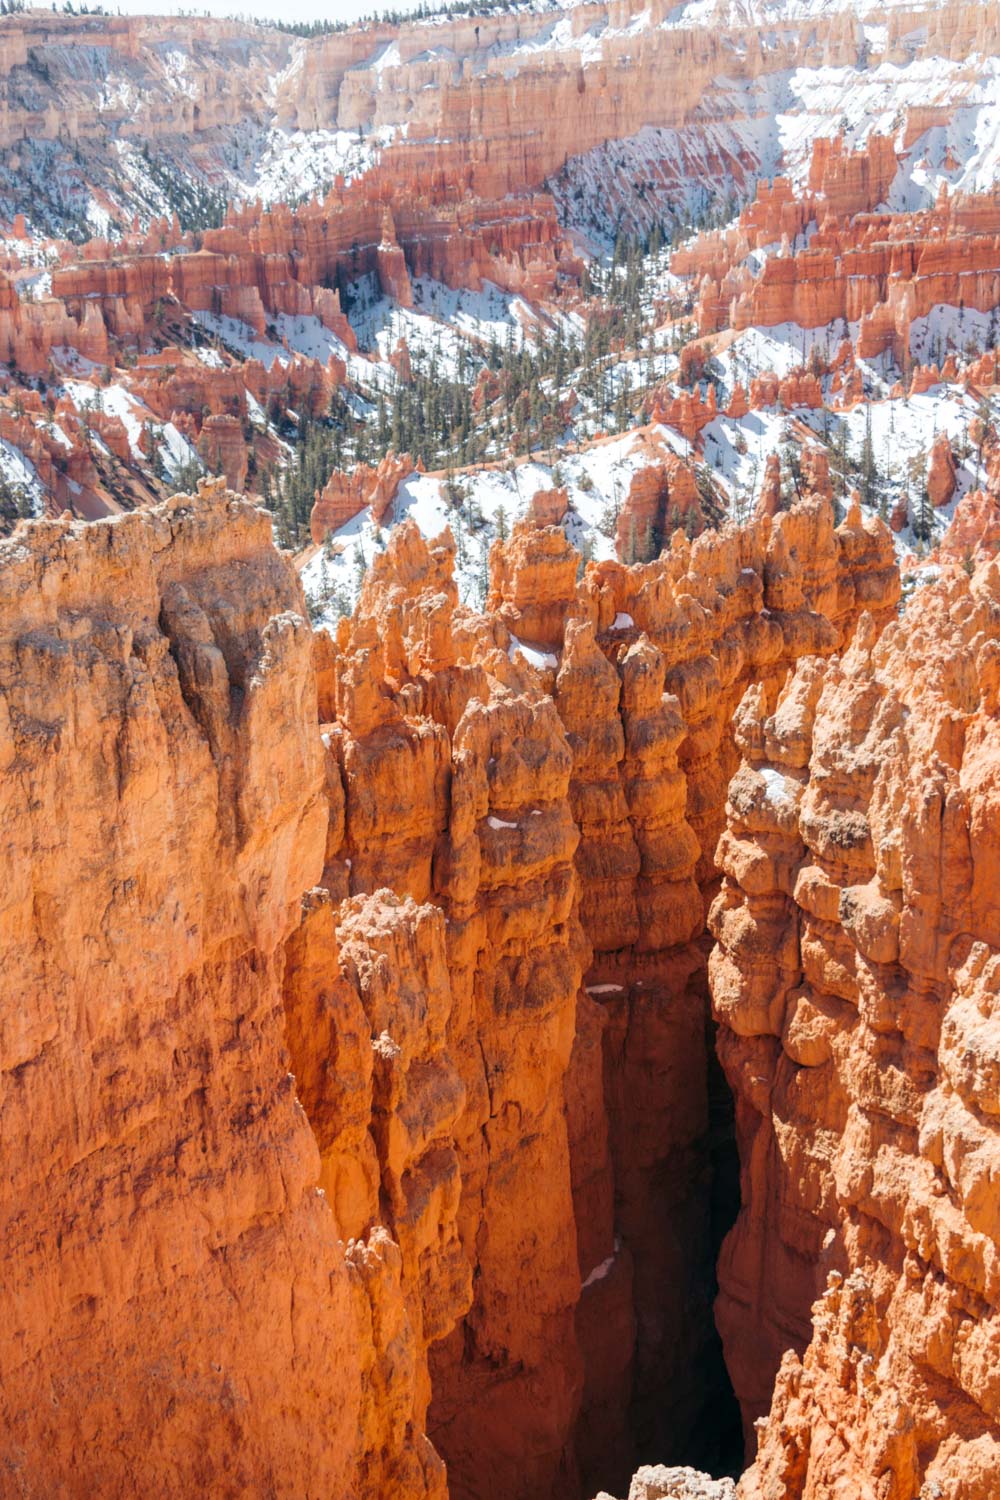 One Day in Bryce Canyon National Park - - Roads and Destinations